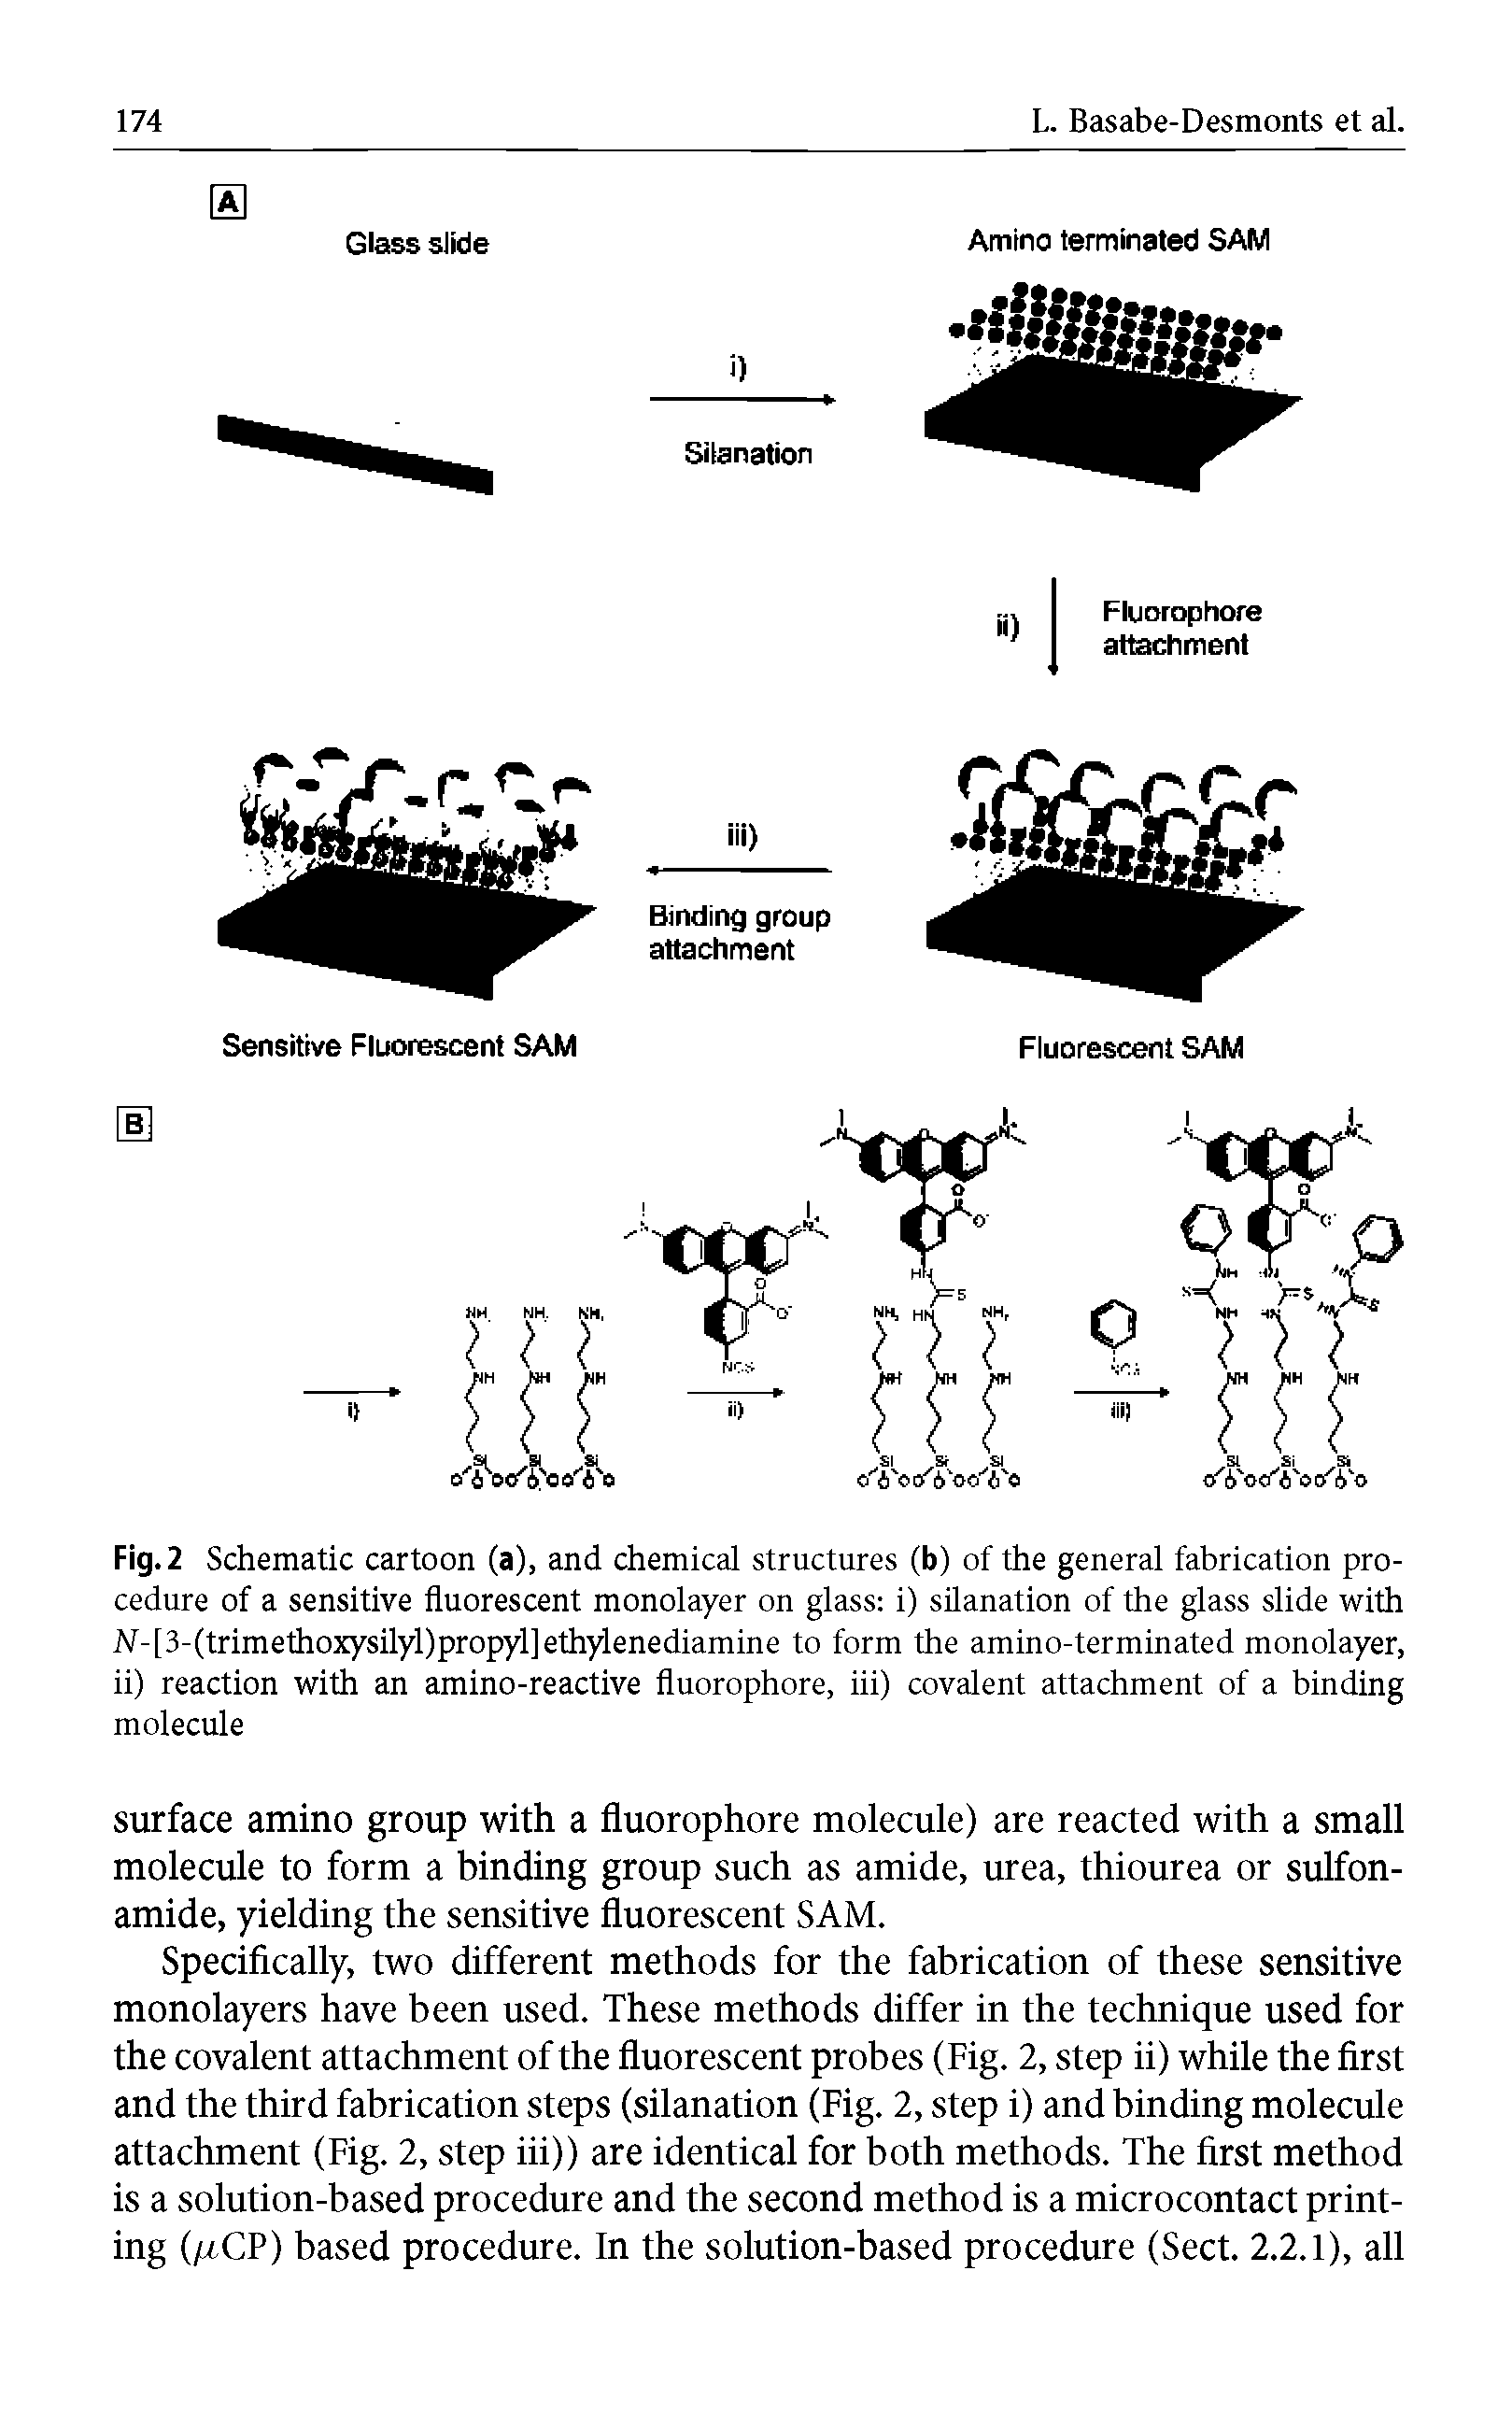 Fig. 2 Schematic cartoon (a), and chemical structures (b) of the general fabrication procedure of a sensitive fluorescent monolayer on glass i) silanation of the glass slide with N-[3-(trimethoxysilyl)propyl]ethylenediamine to form the amino-terminated monolayer, ii) reaction with an amino-reactive fluorophore, iii) covalent attachment of a binding molecule...